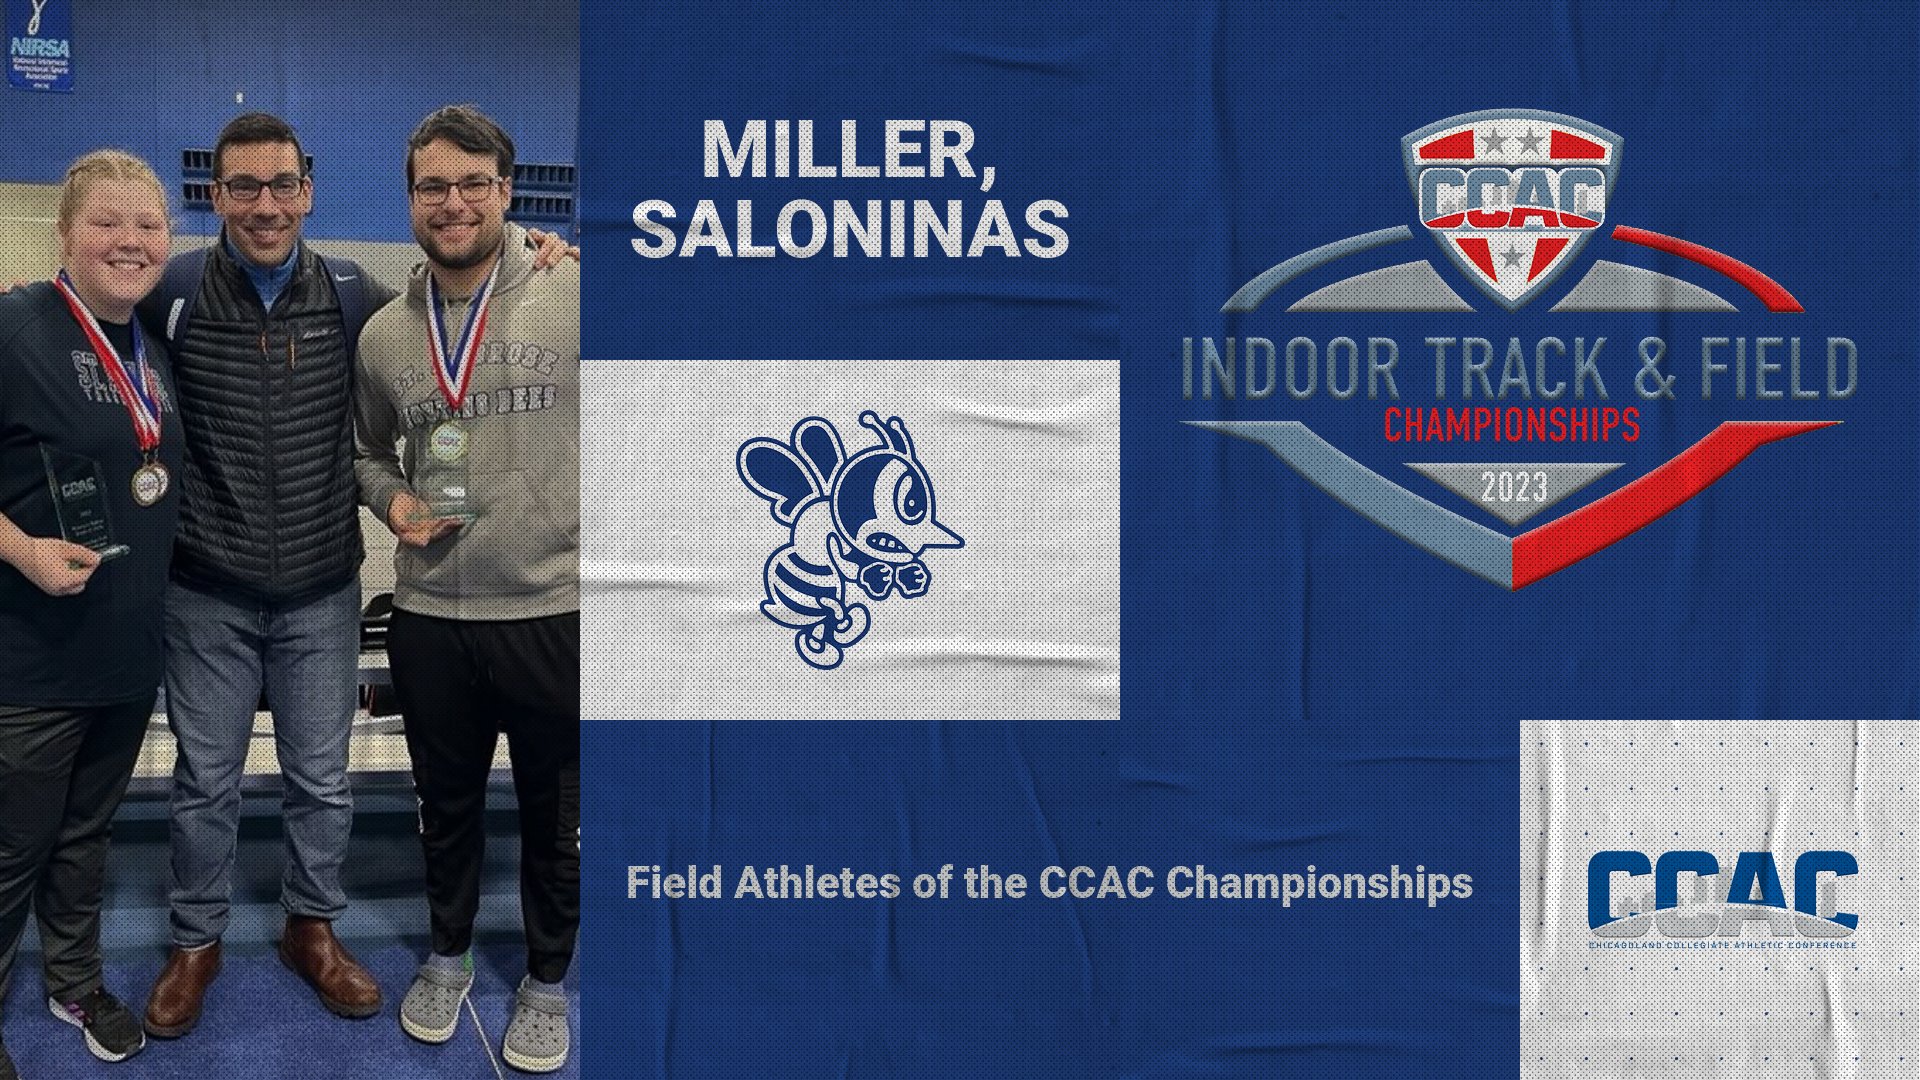 Miller, Saloninas named CCAC Field Athletes of the Championships